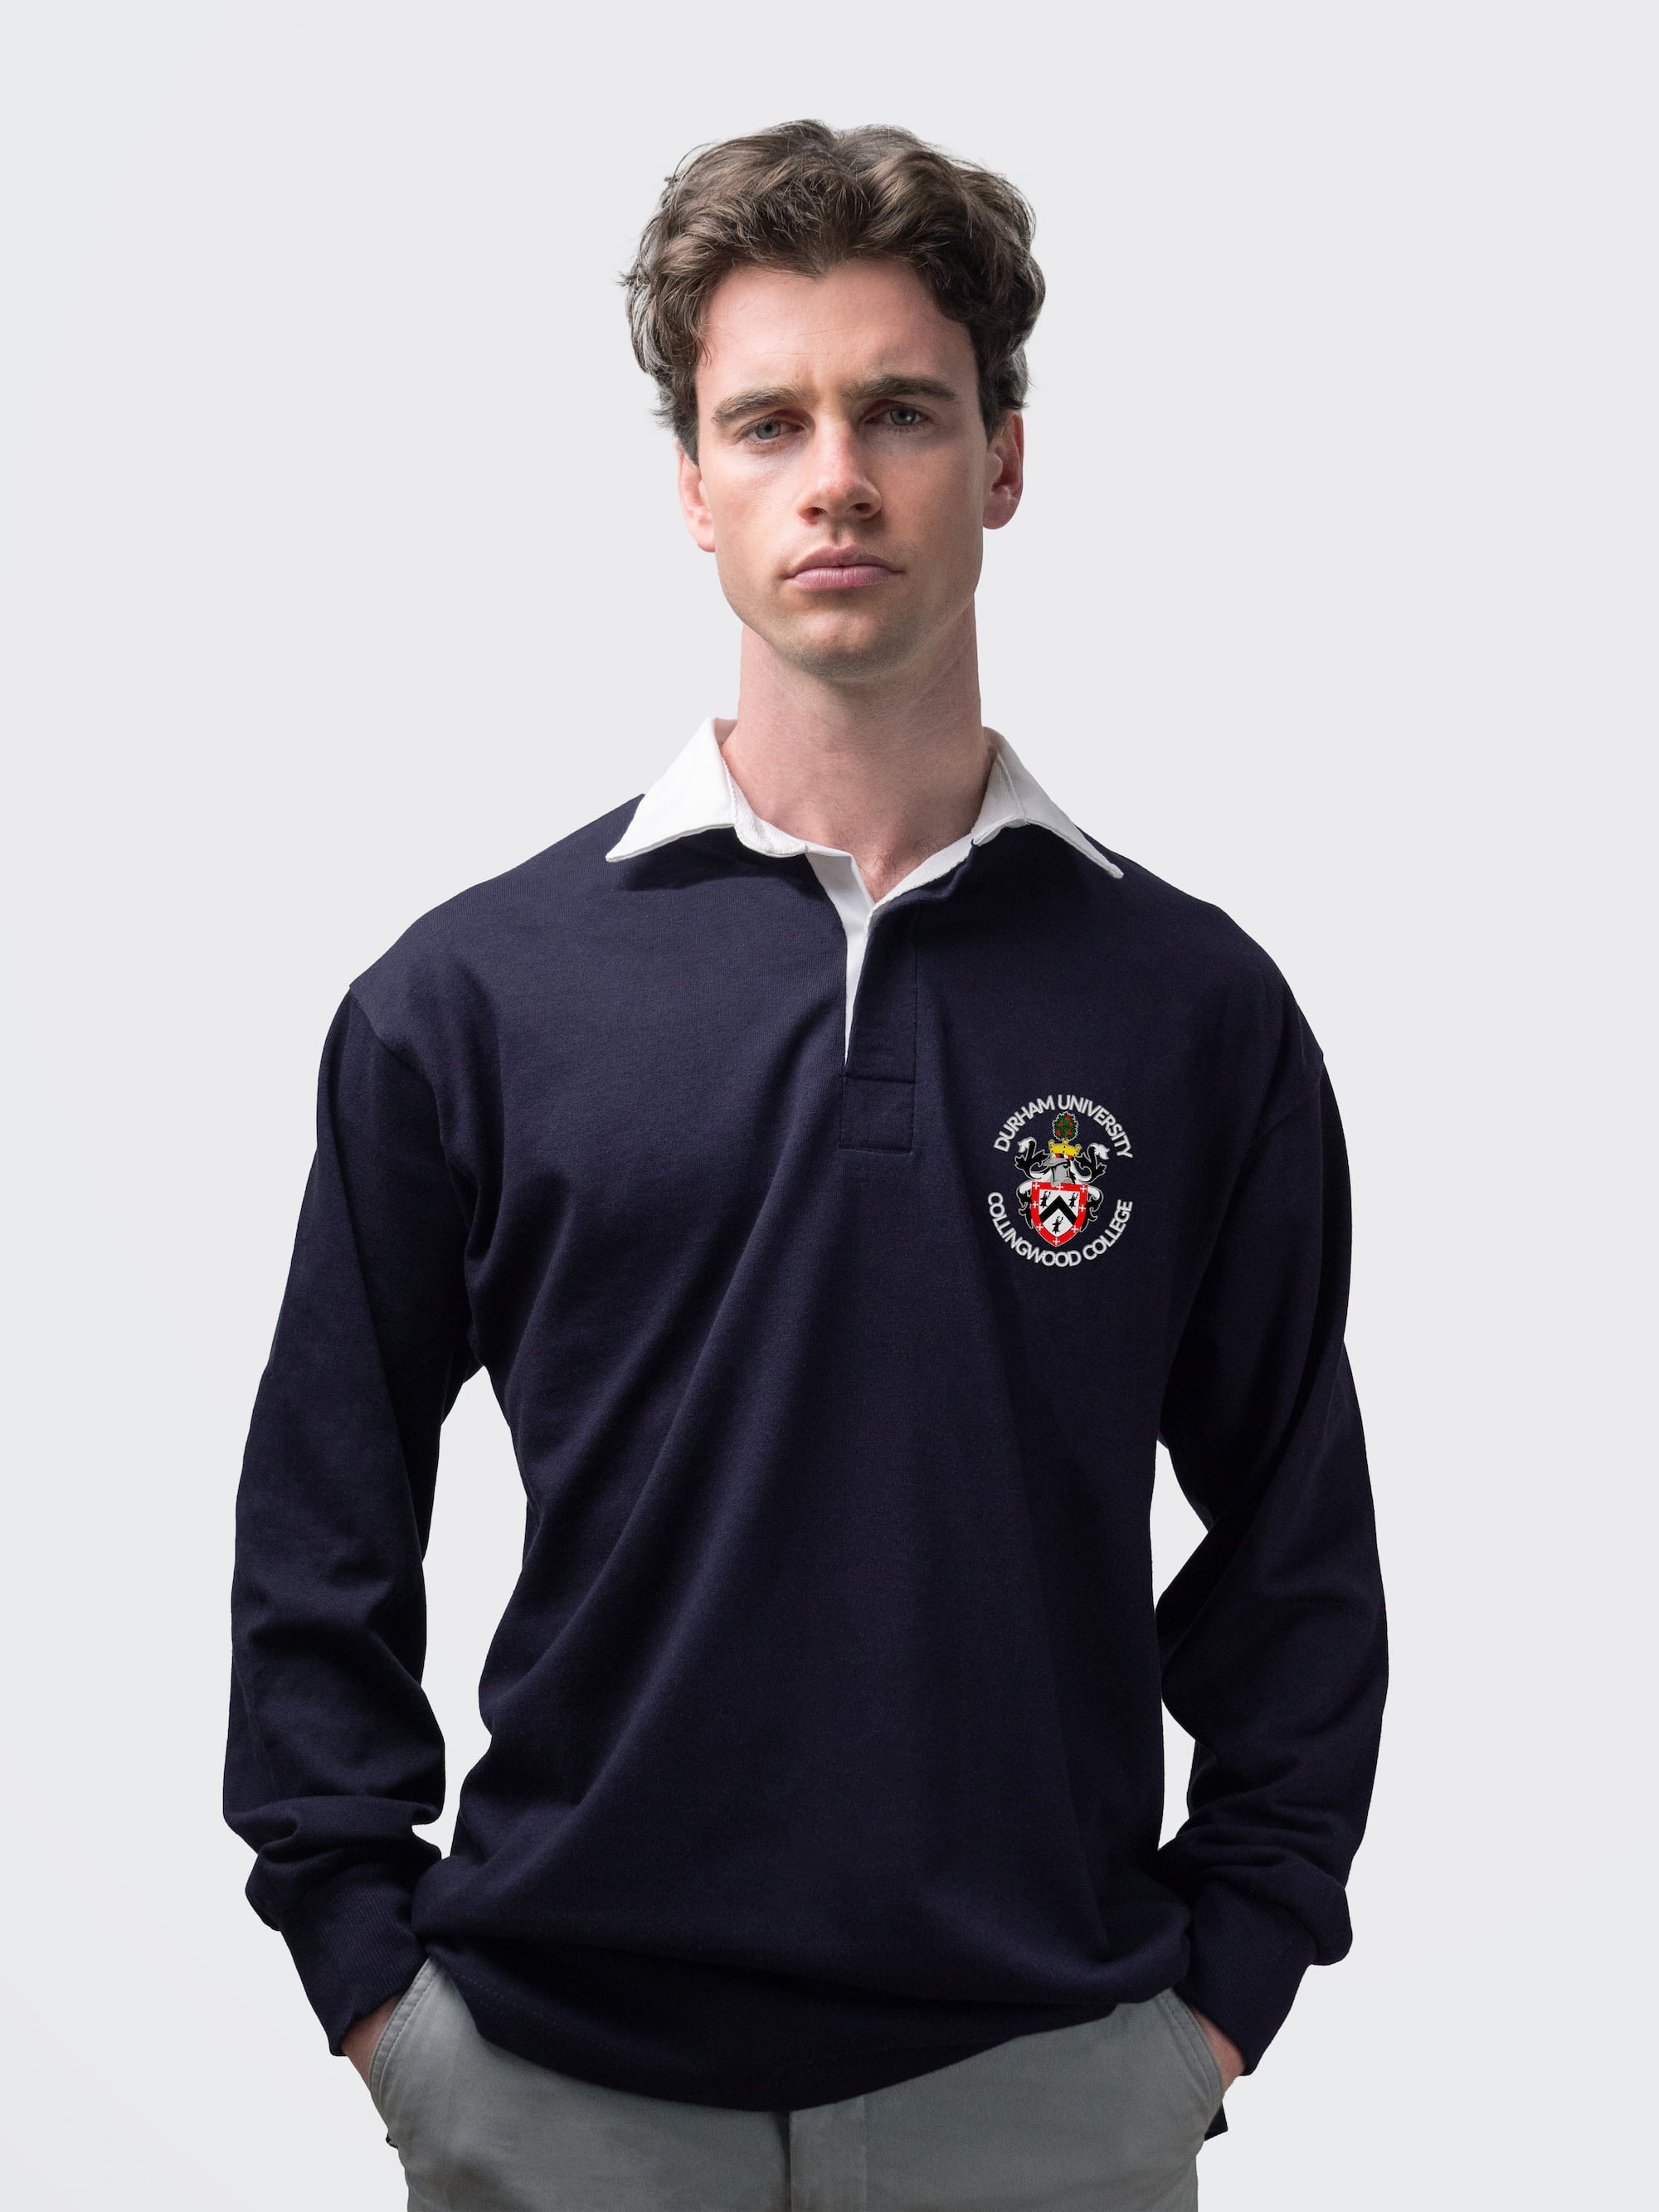 Collingwood student wearing an embroidered mens rugby shirt in navy